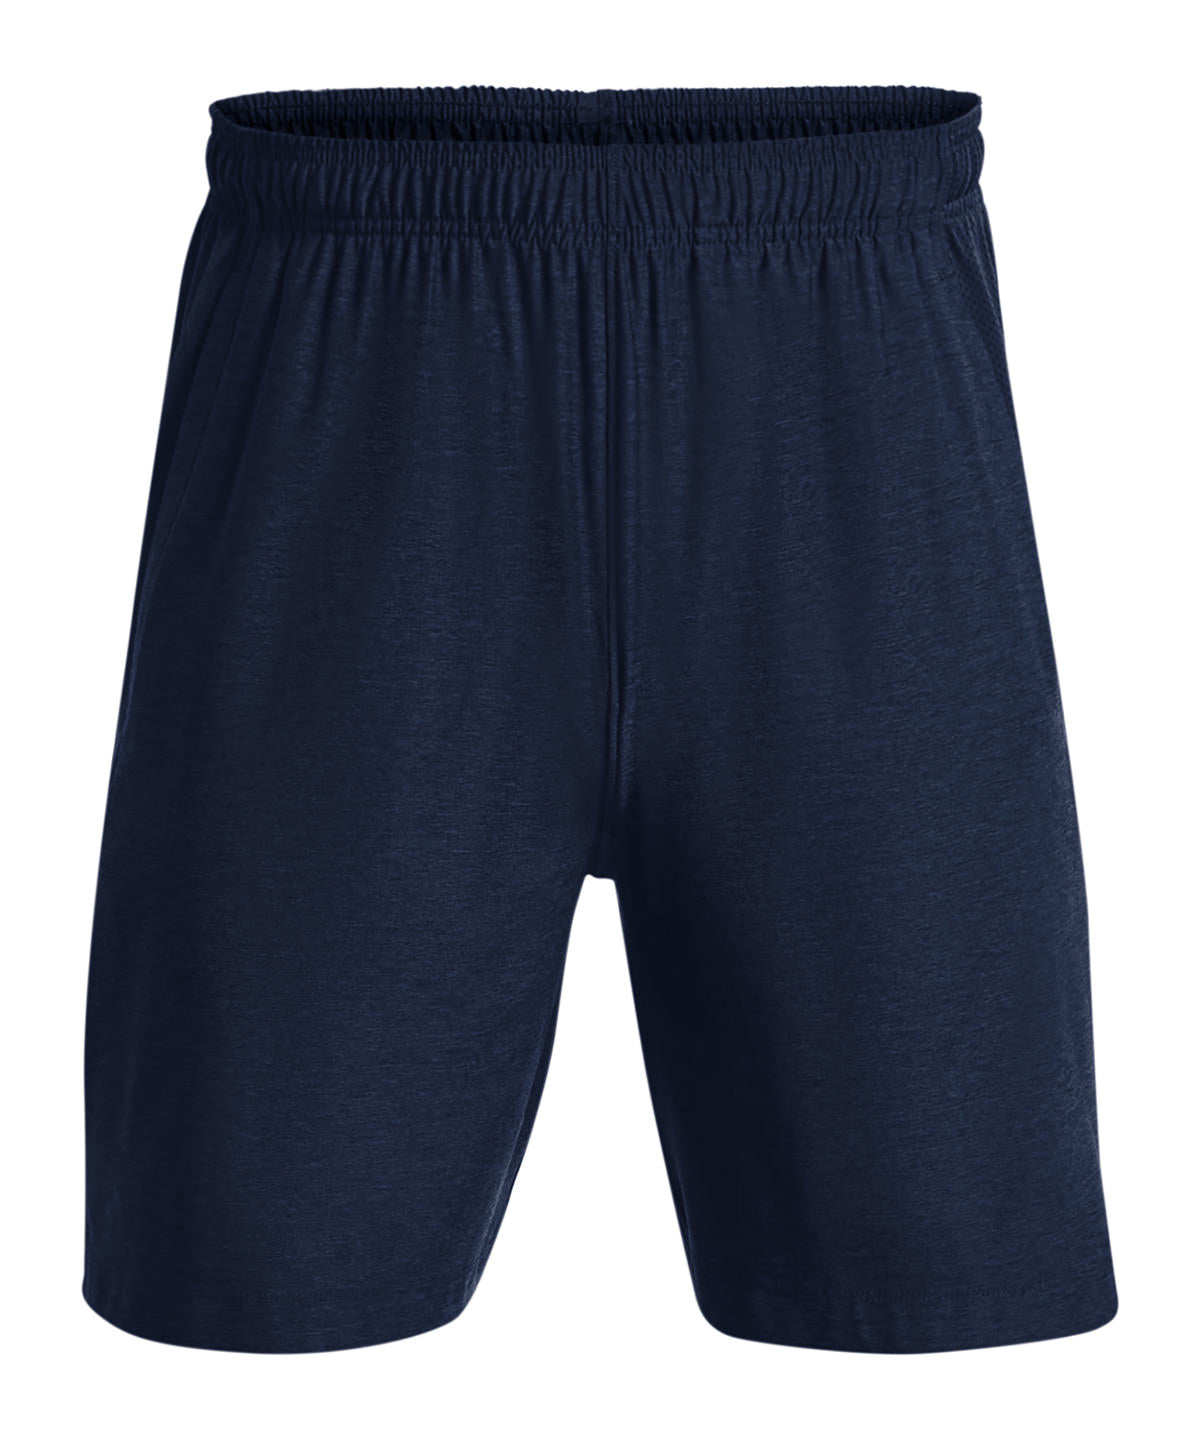 Under Armour Tech vent shorts UA049 - COOZO